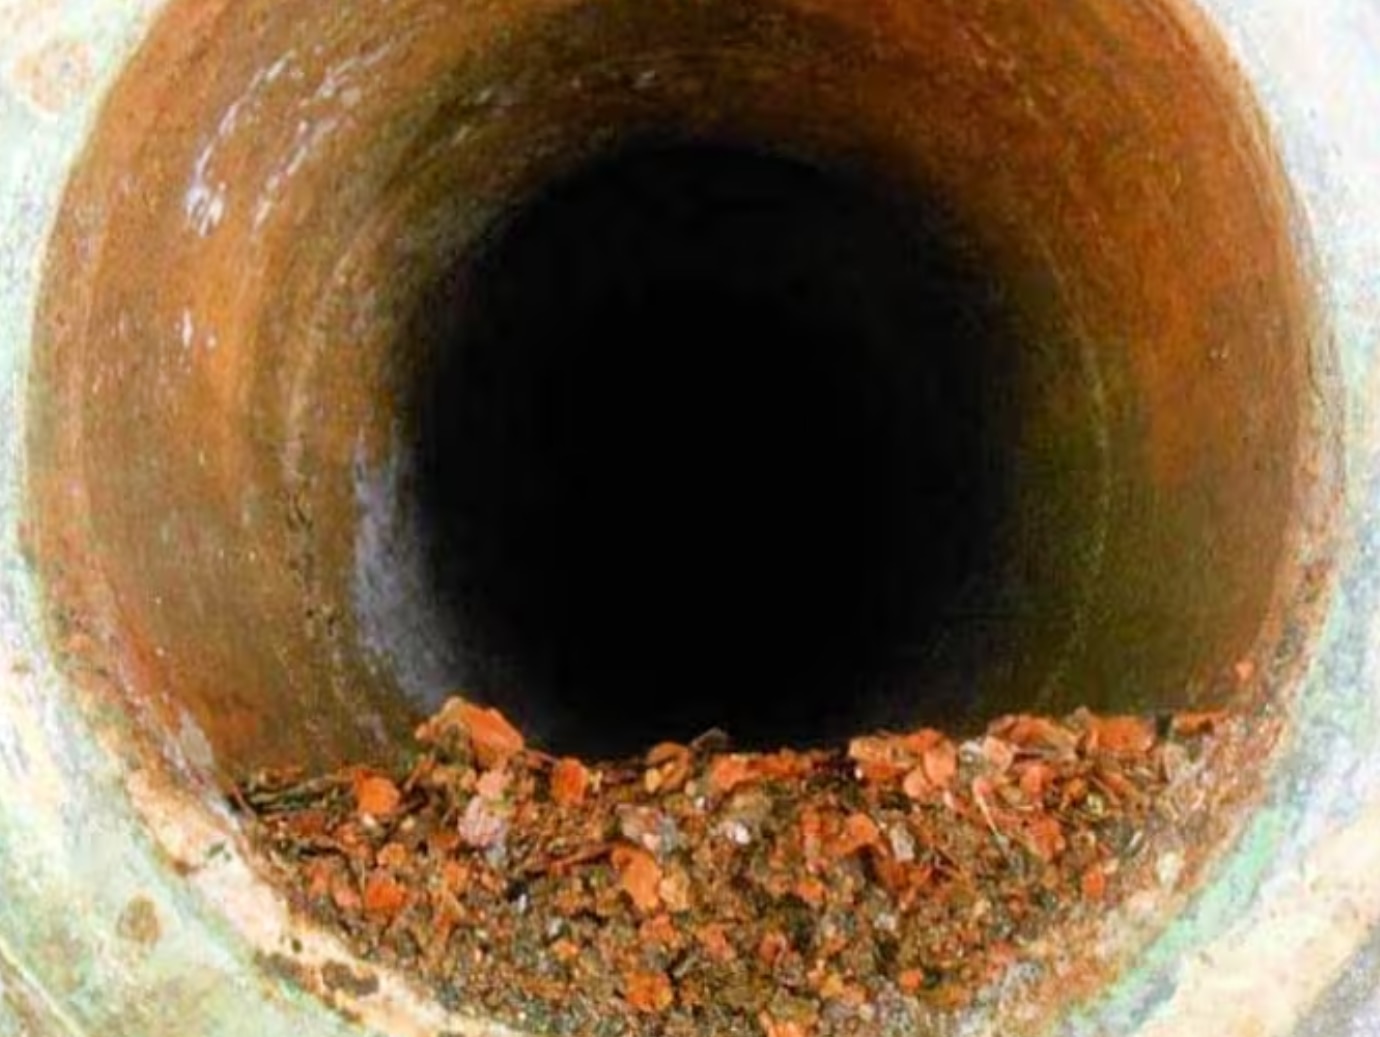 Deluge pipe with rubble inside